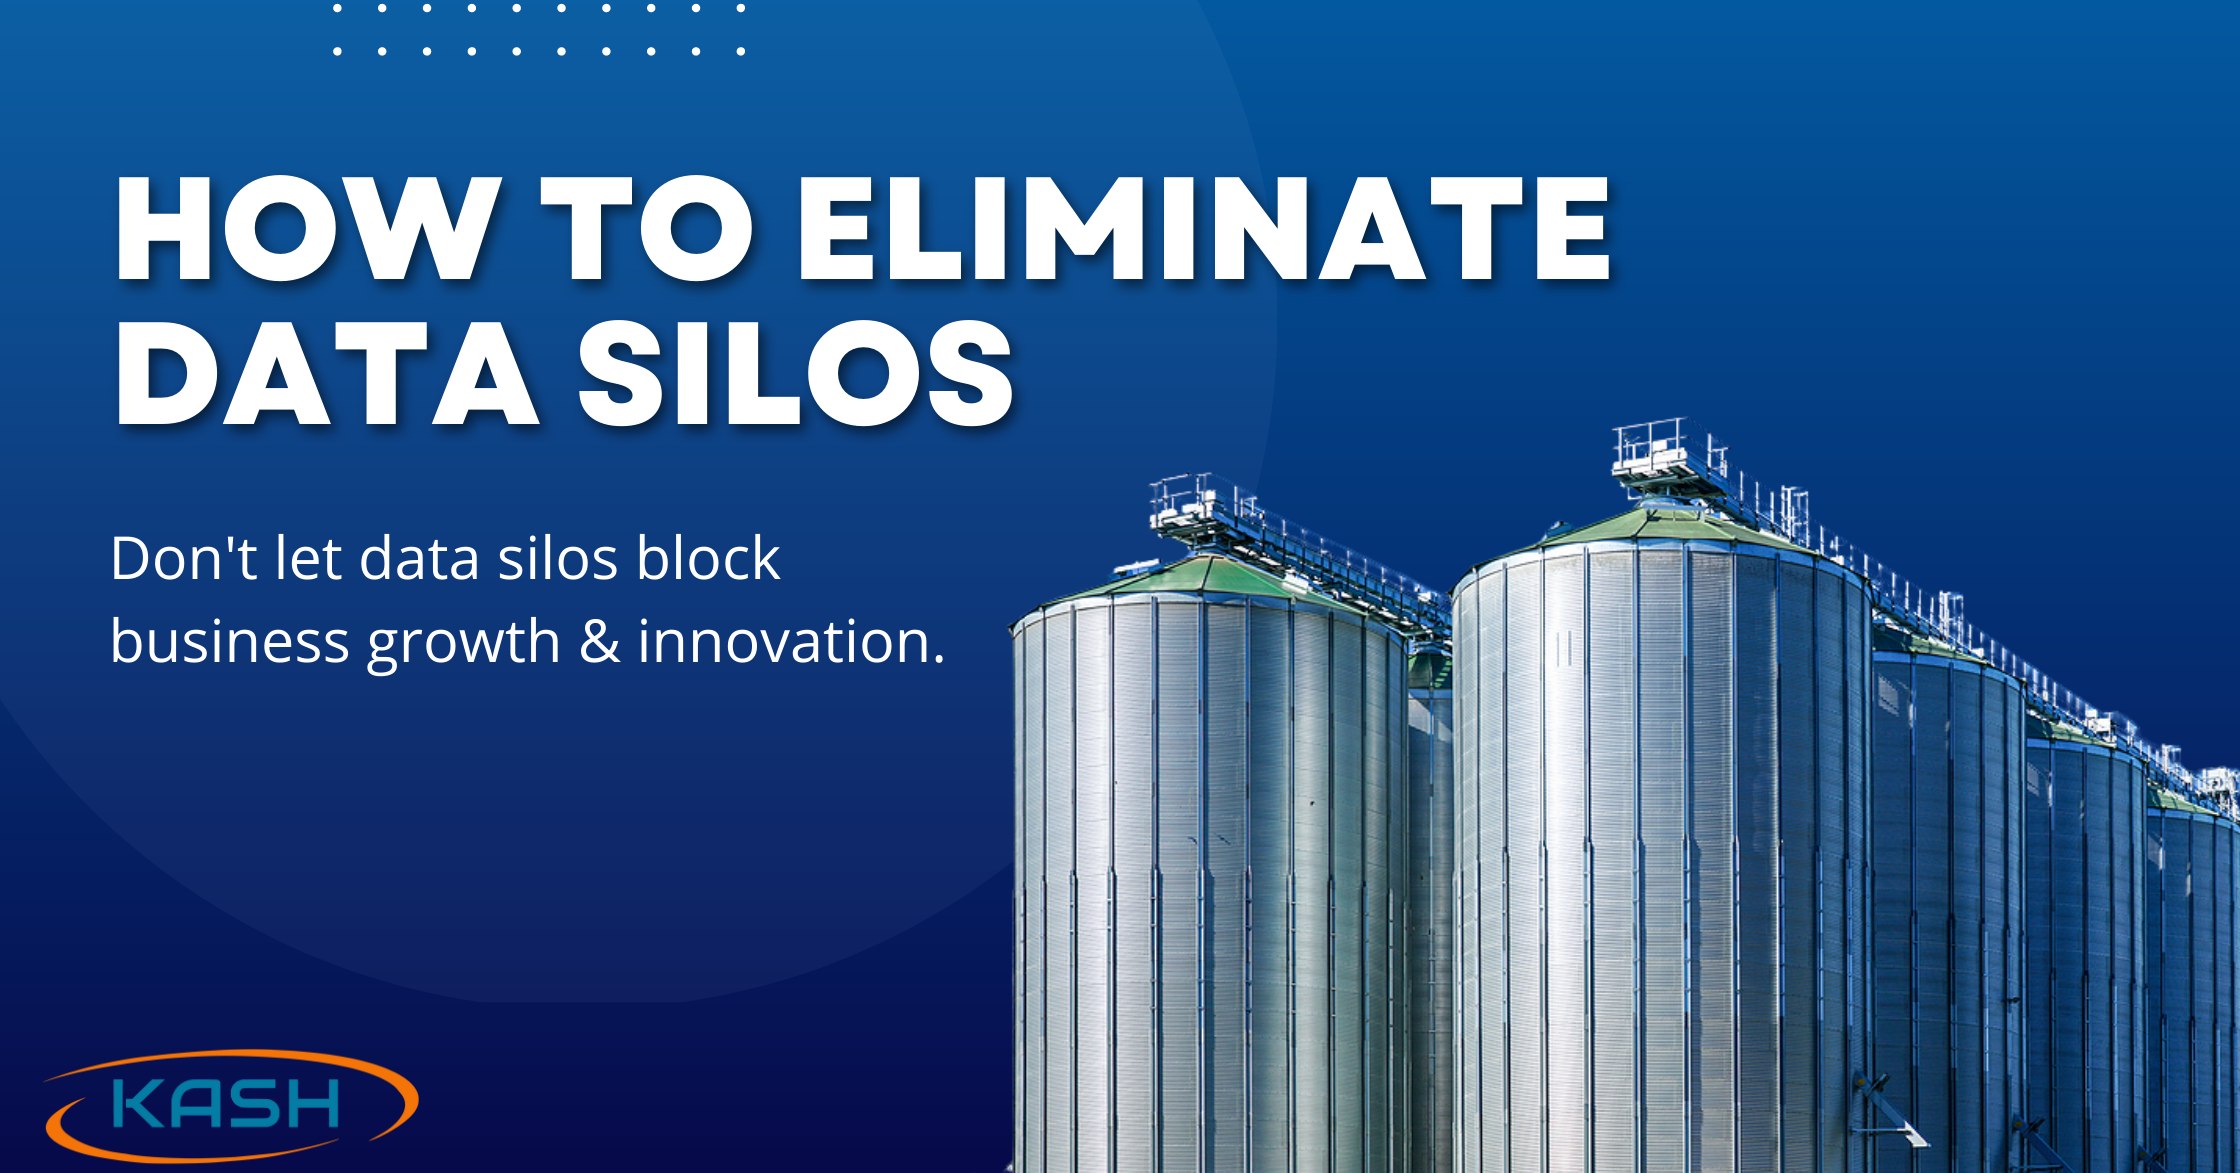 Why Data Silos Are Problematic and How to Fix Them